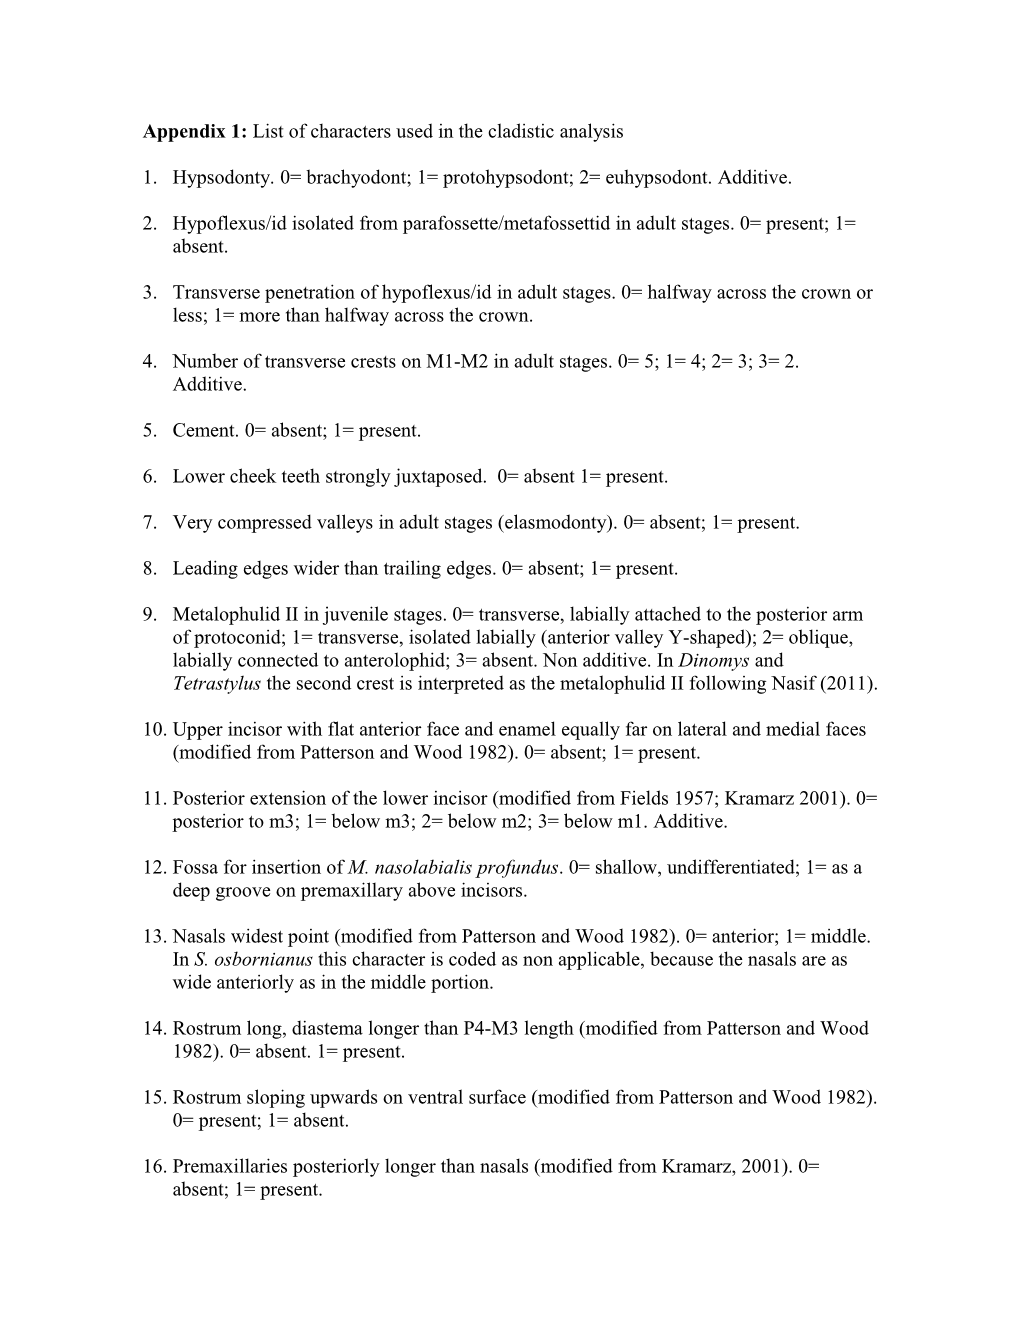 Appendix 1: List of Characters Used in the Cladistic Analysis